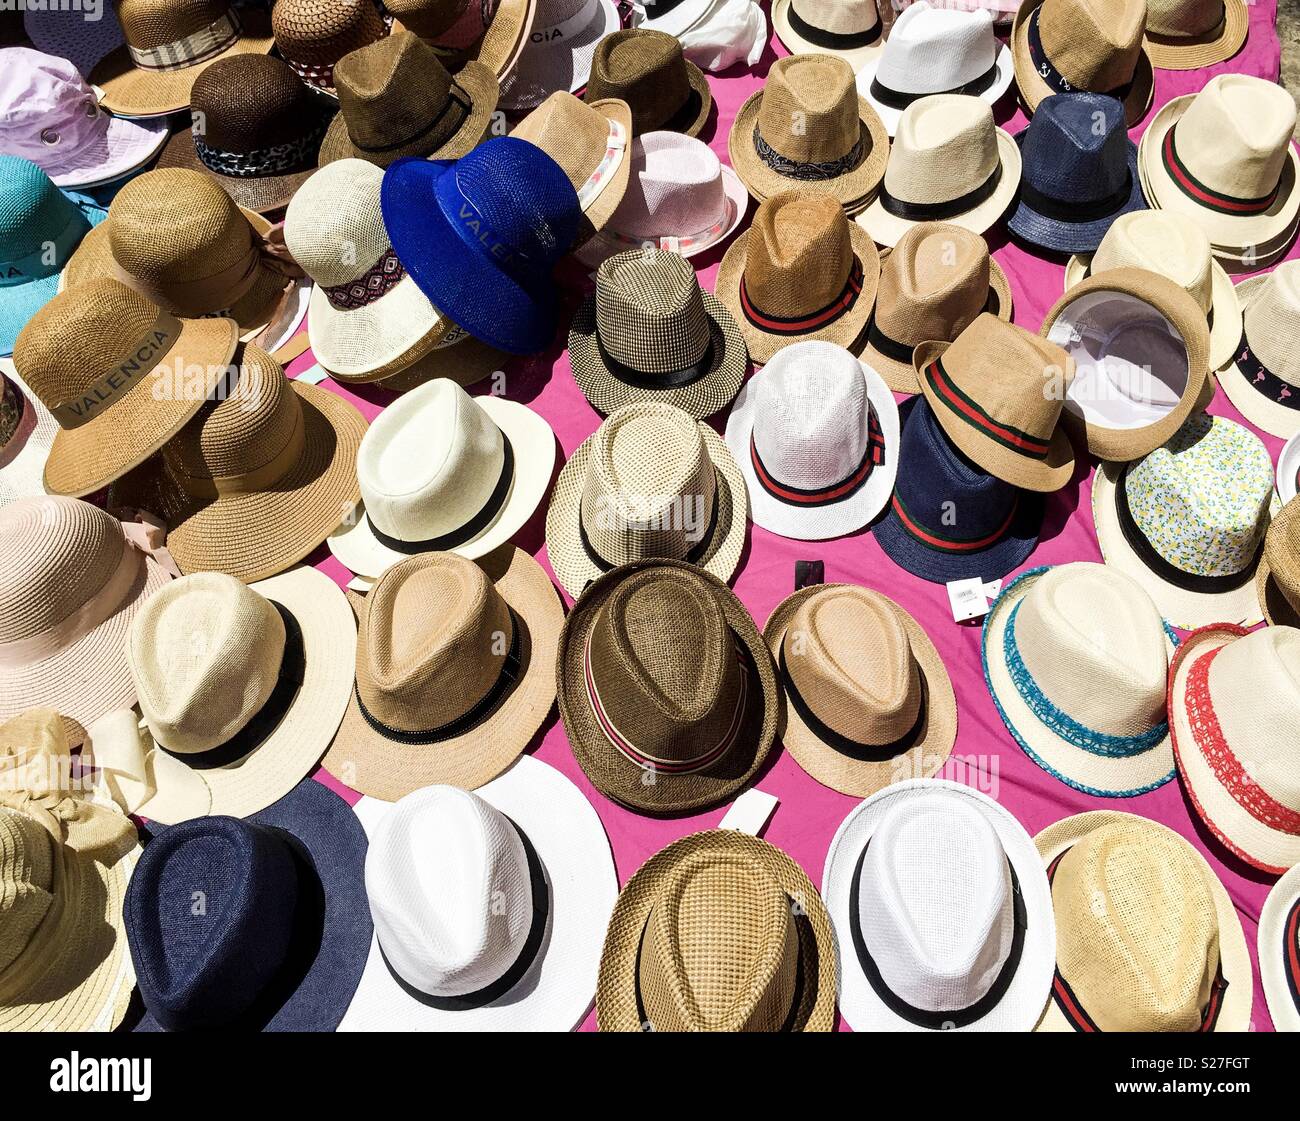 hats at a street vendor stand Stock Photo